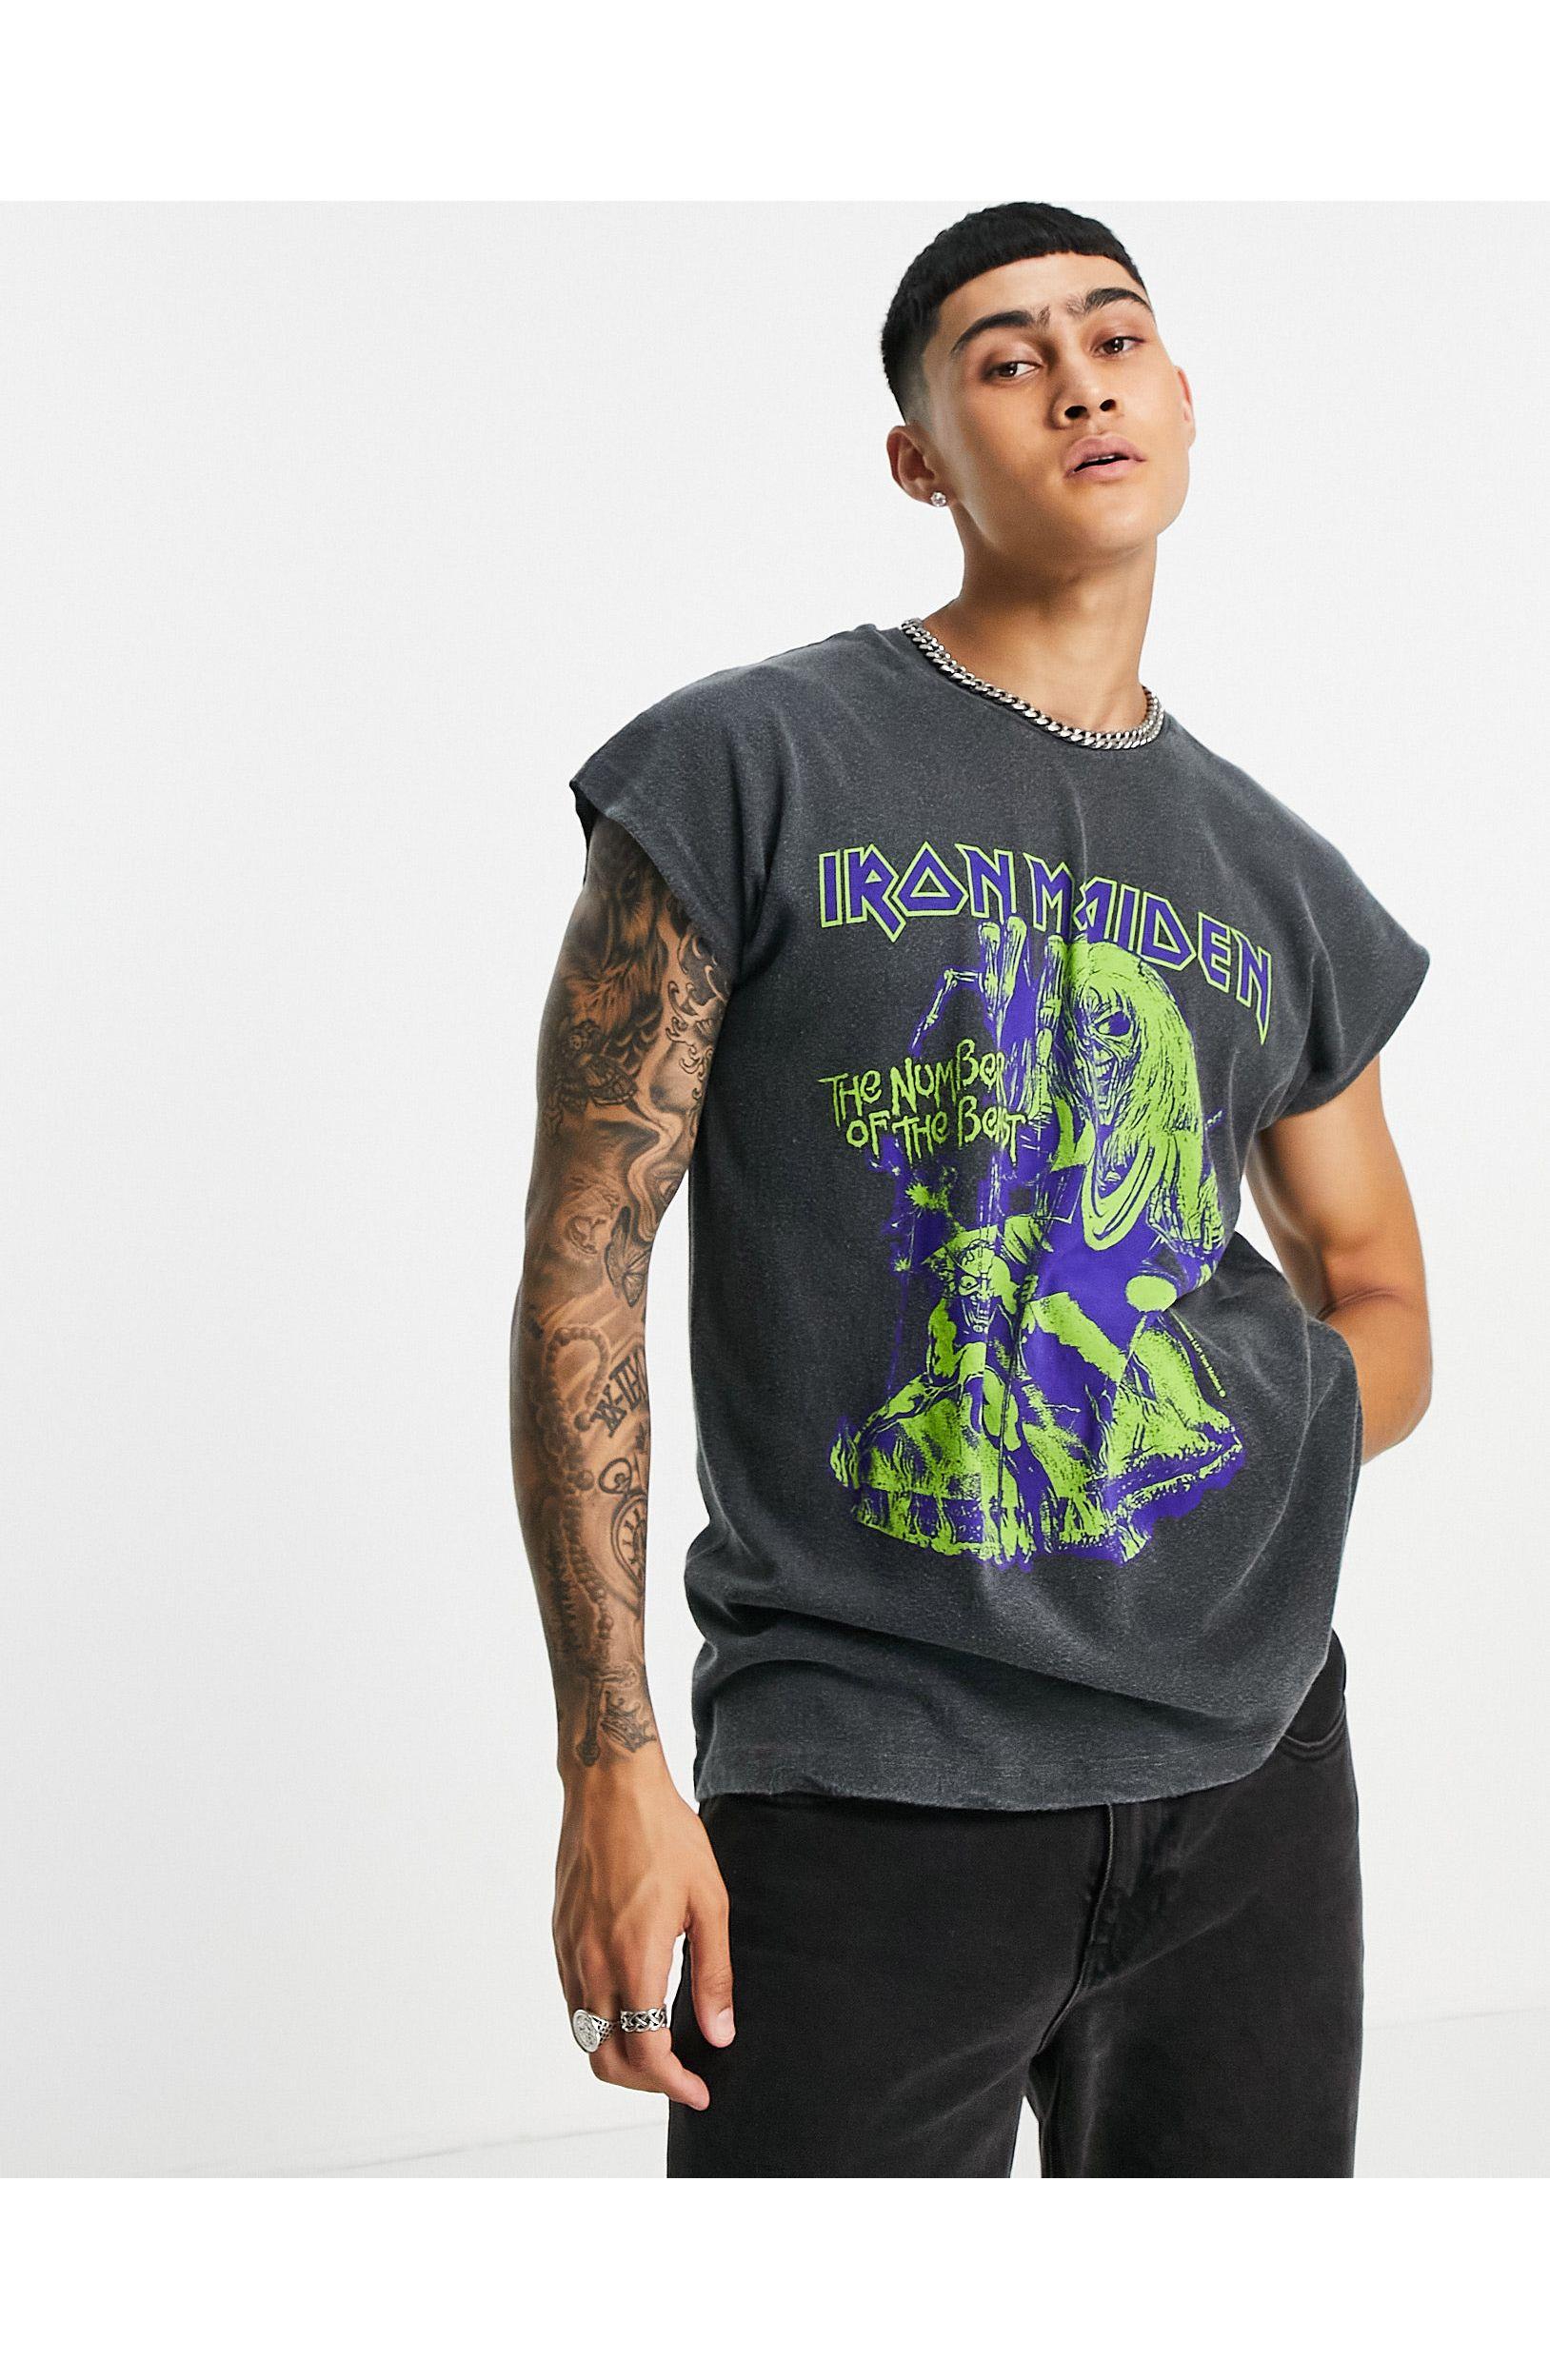 TOPMAN Cotton Oversized Tank With Iron Maiden Print in Black for Men - Lyst